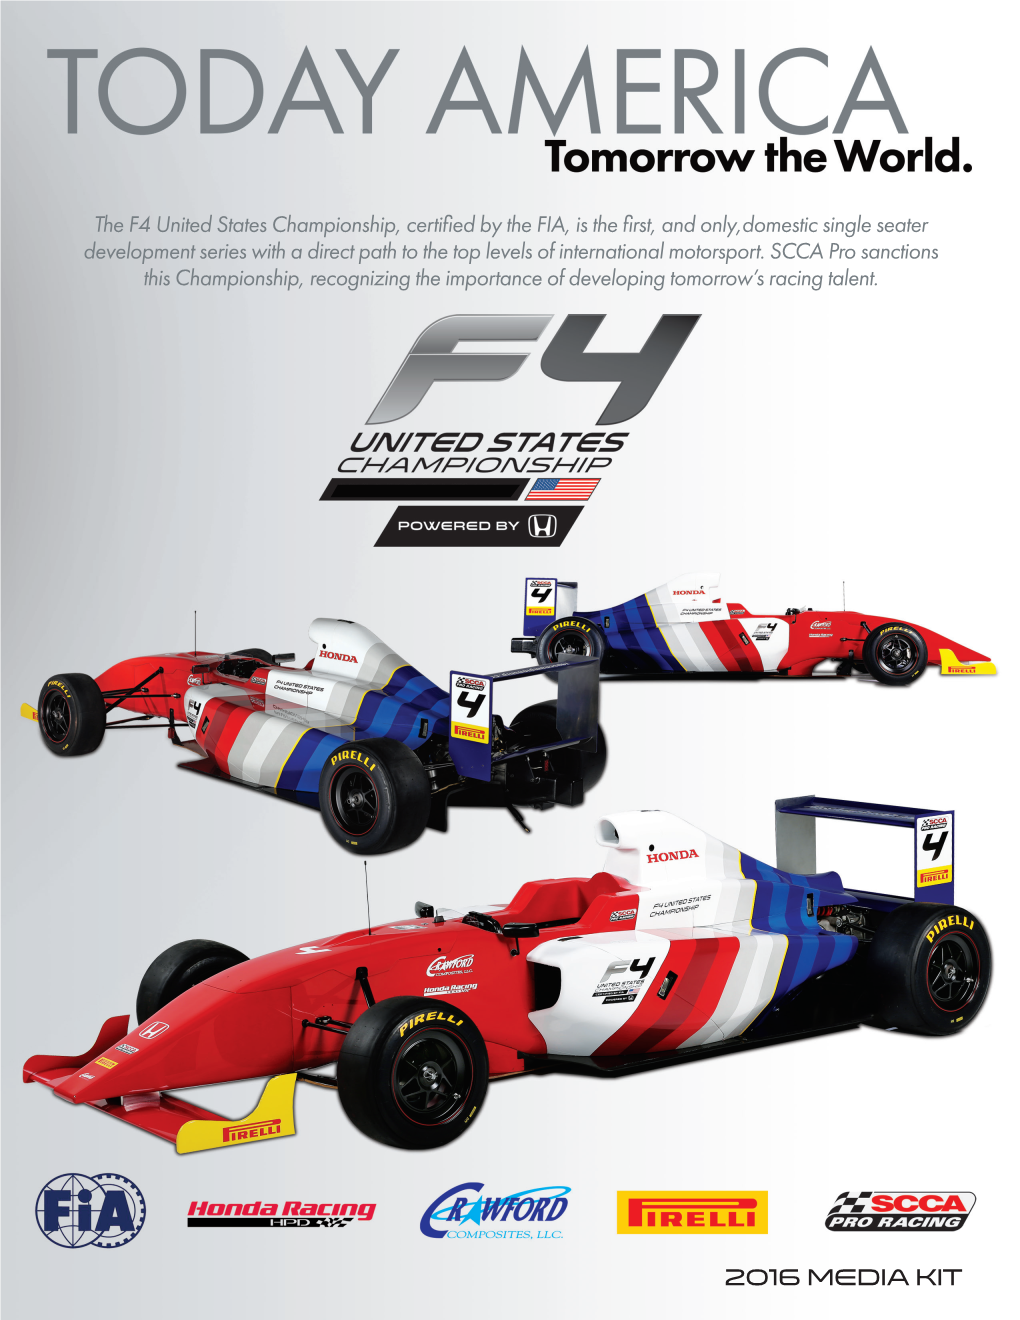 The F4 United States Championship, Certified by The